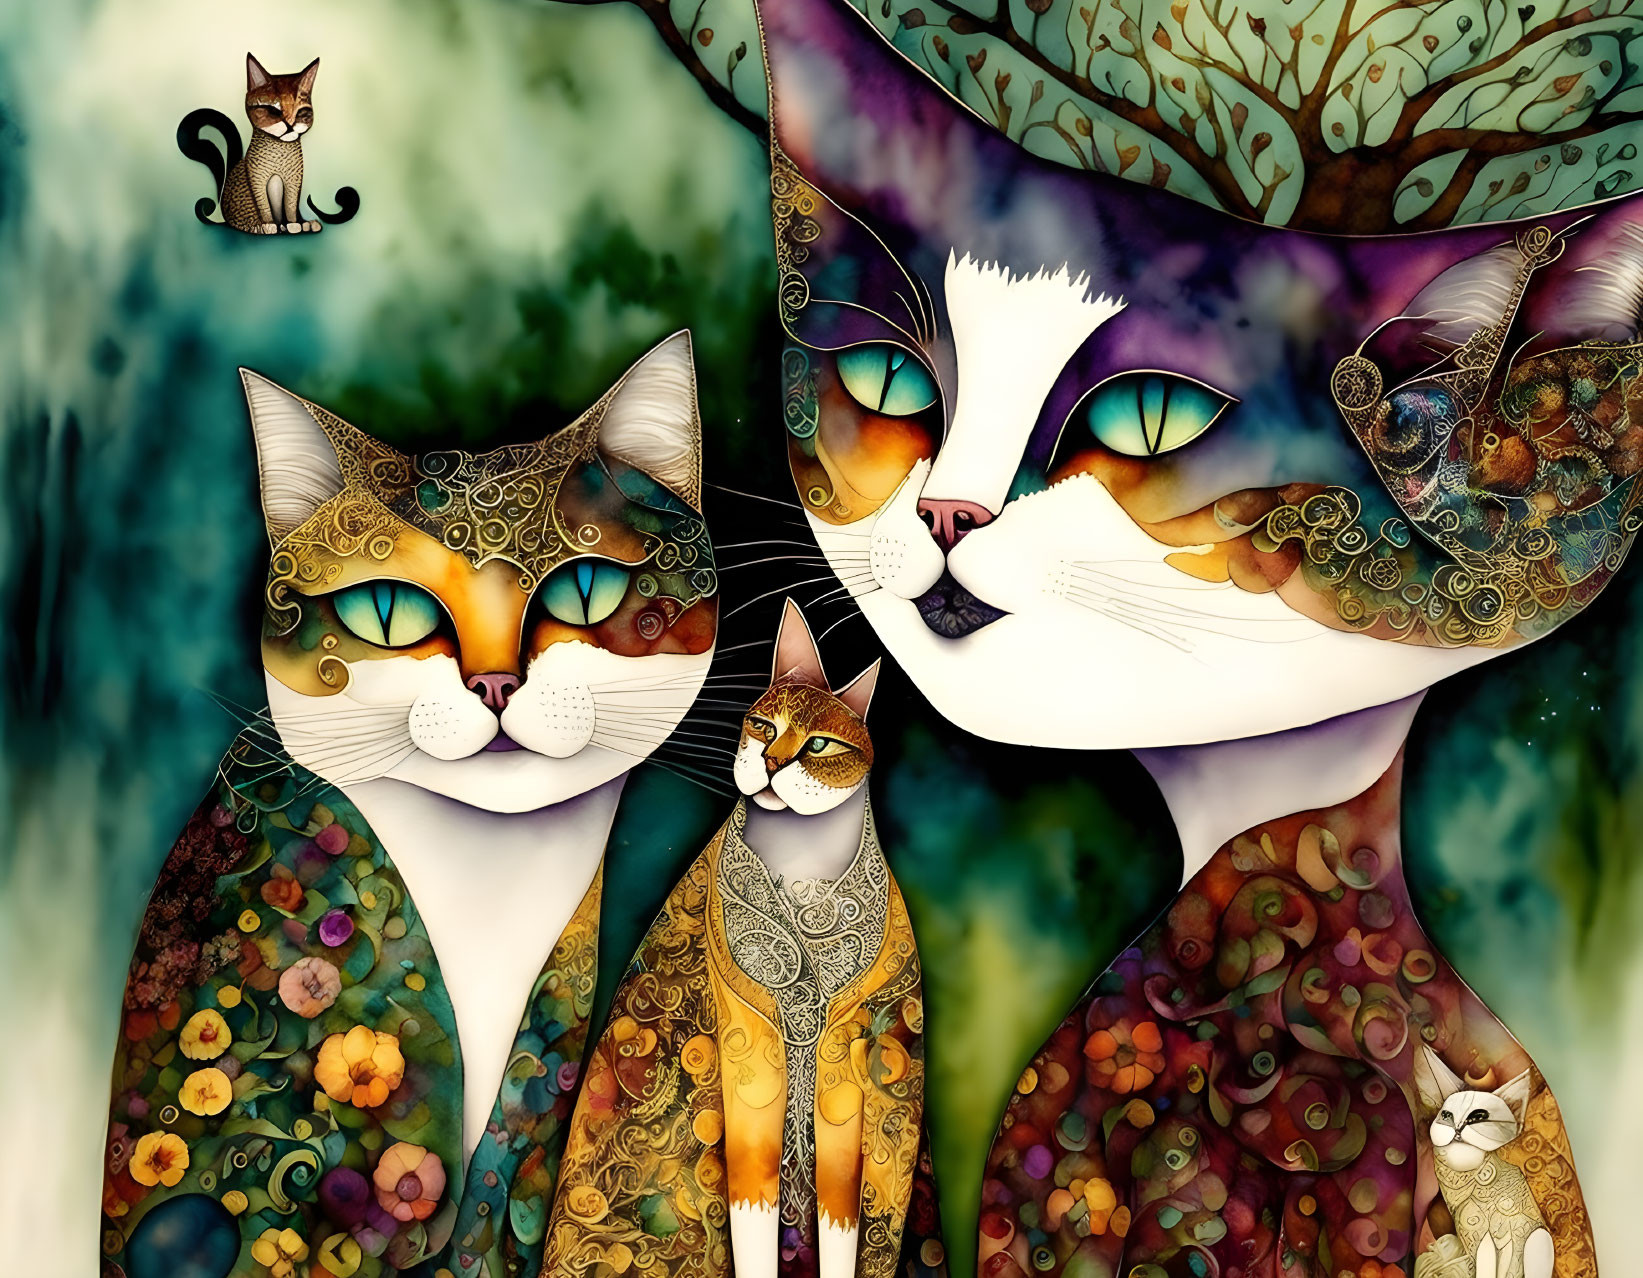 Vibrant Stylized Cat Art with Detailed Patterns